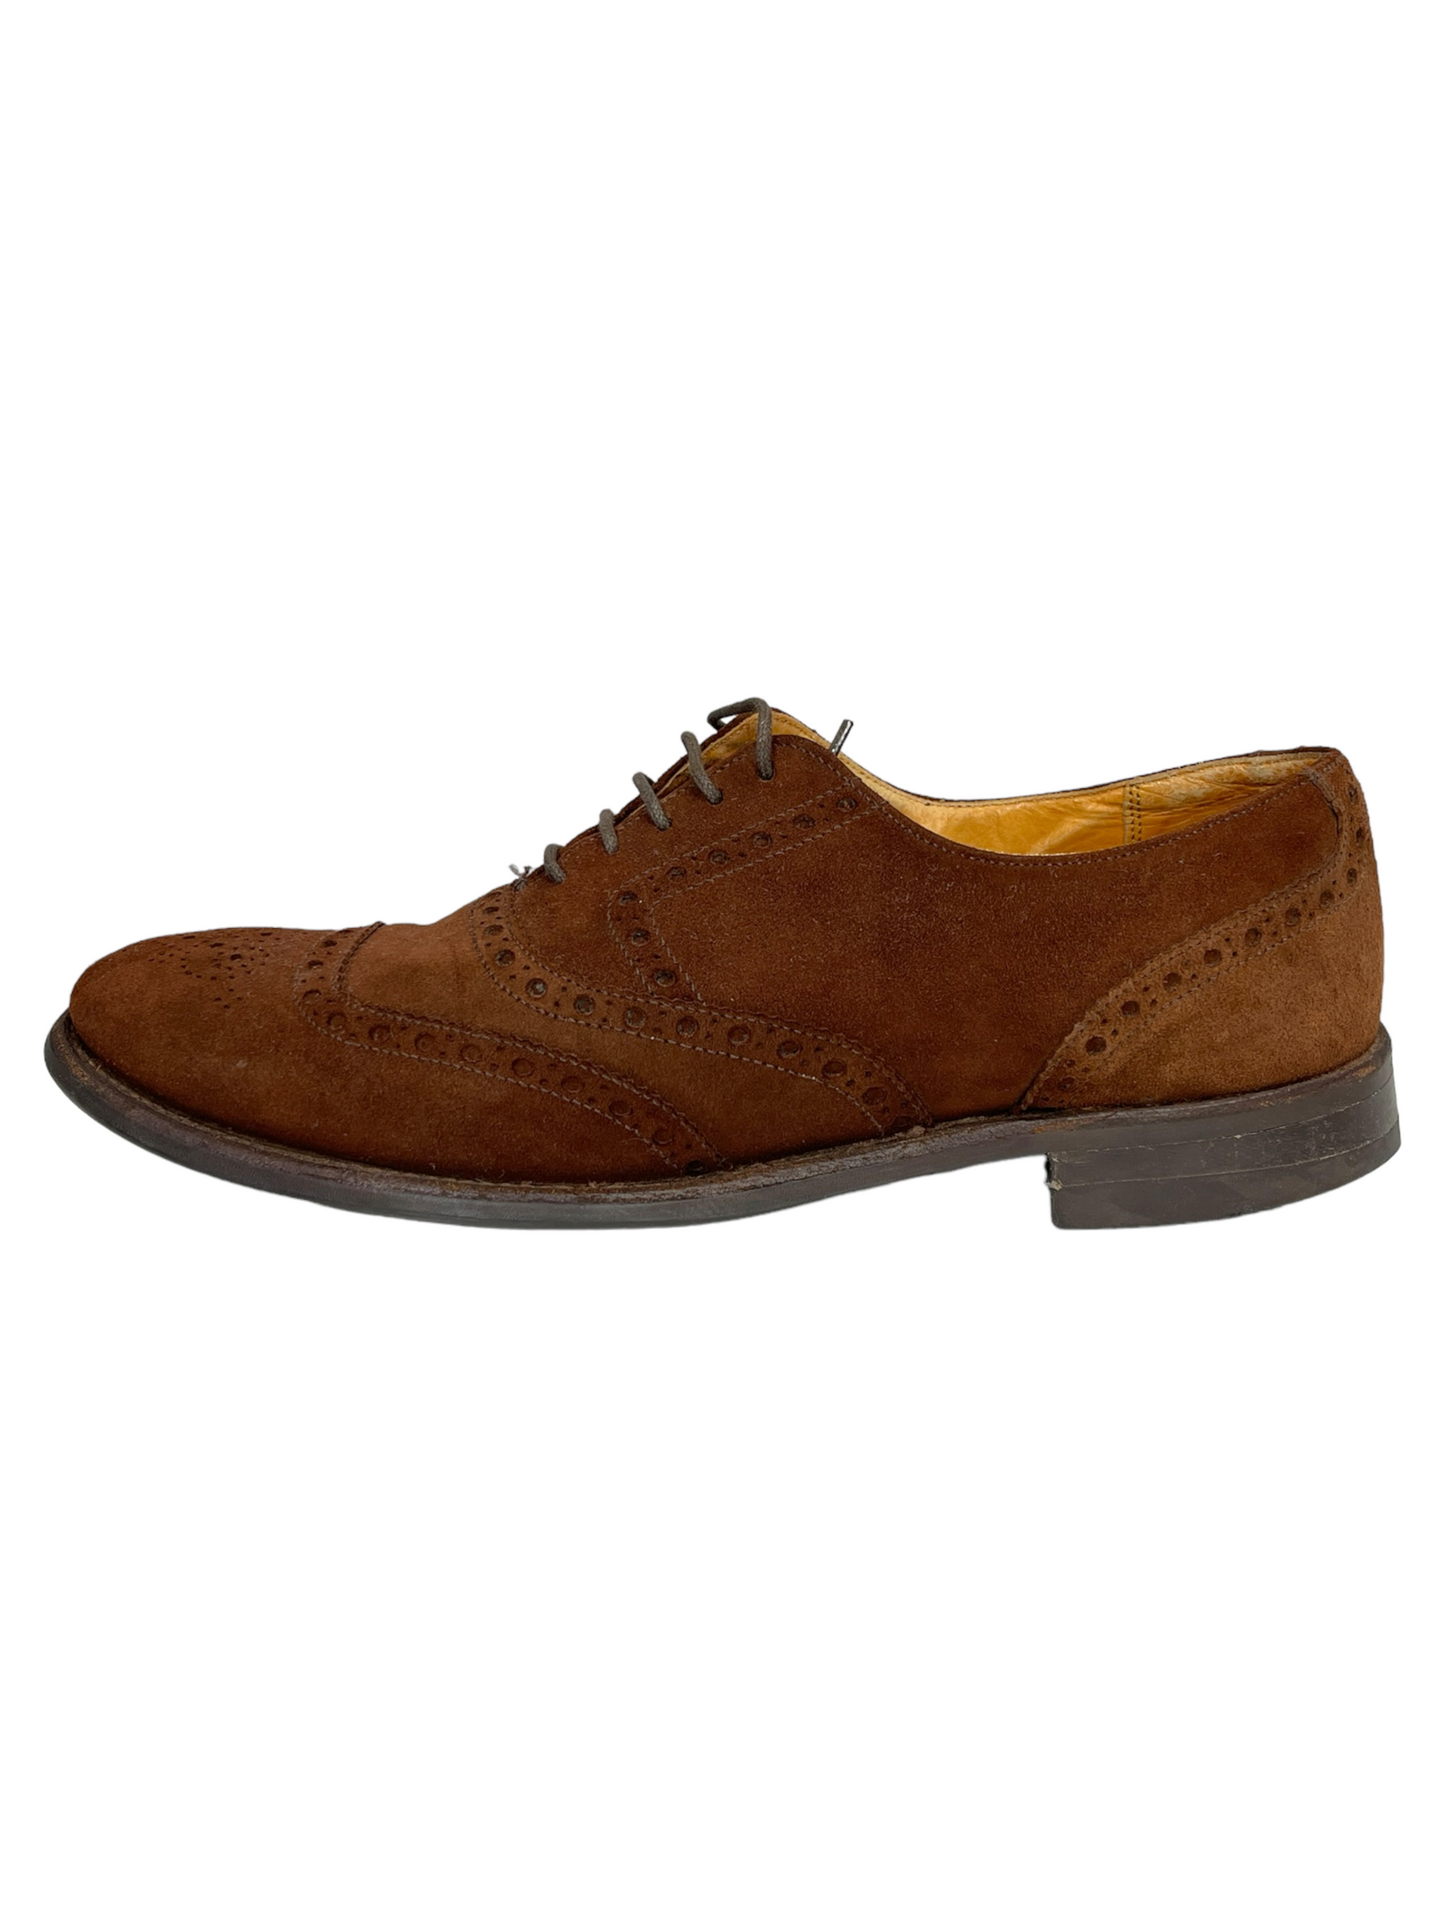 Cole Haan Brown Suede Dress Shoe - Genuine Design Luxury Consignment Calgary, Alberta, Canada New and Pre-Owned Clothing, Shoes, Accessories.